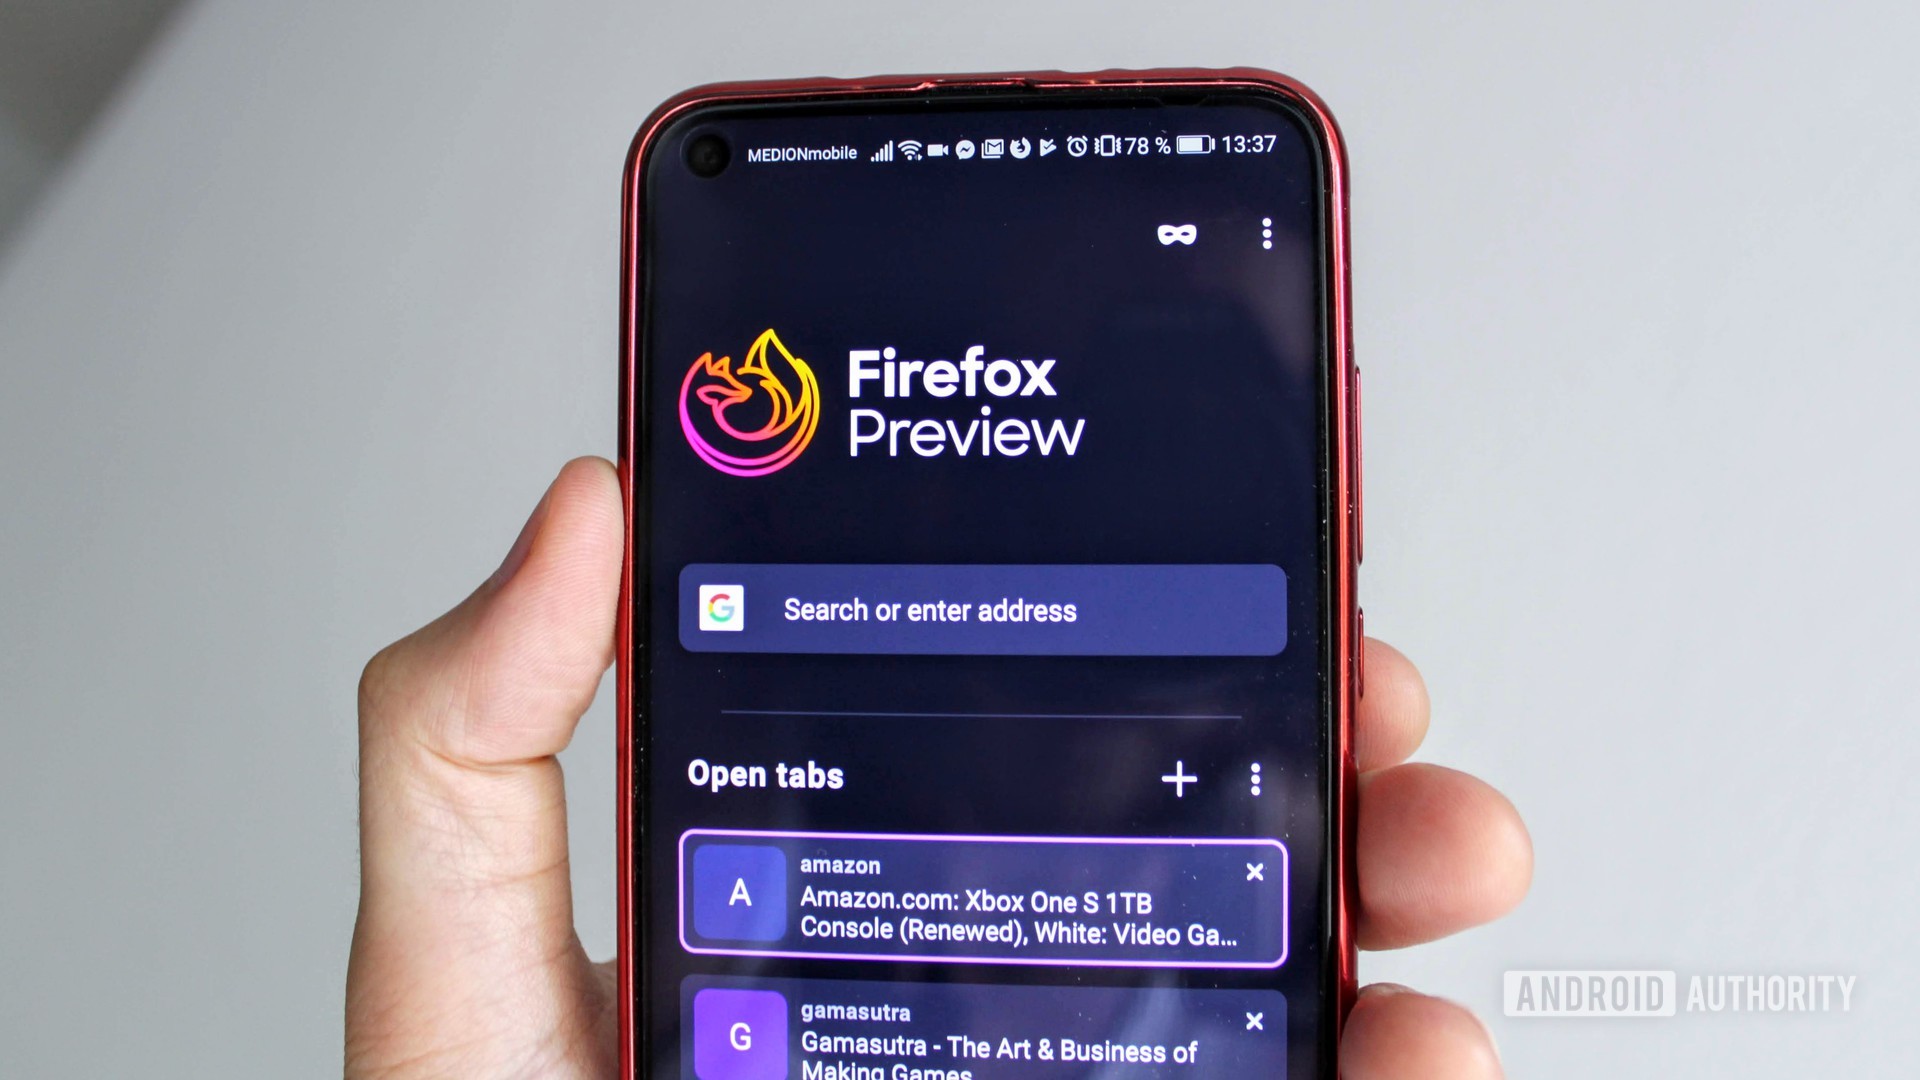 Mozilla Firefox Preview dark mode photo on the Honor View 20.